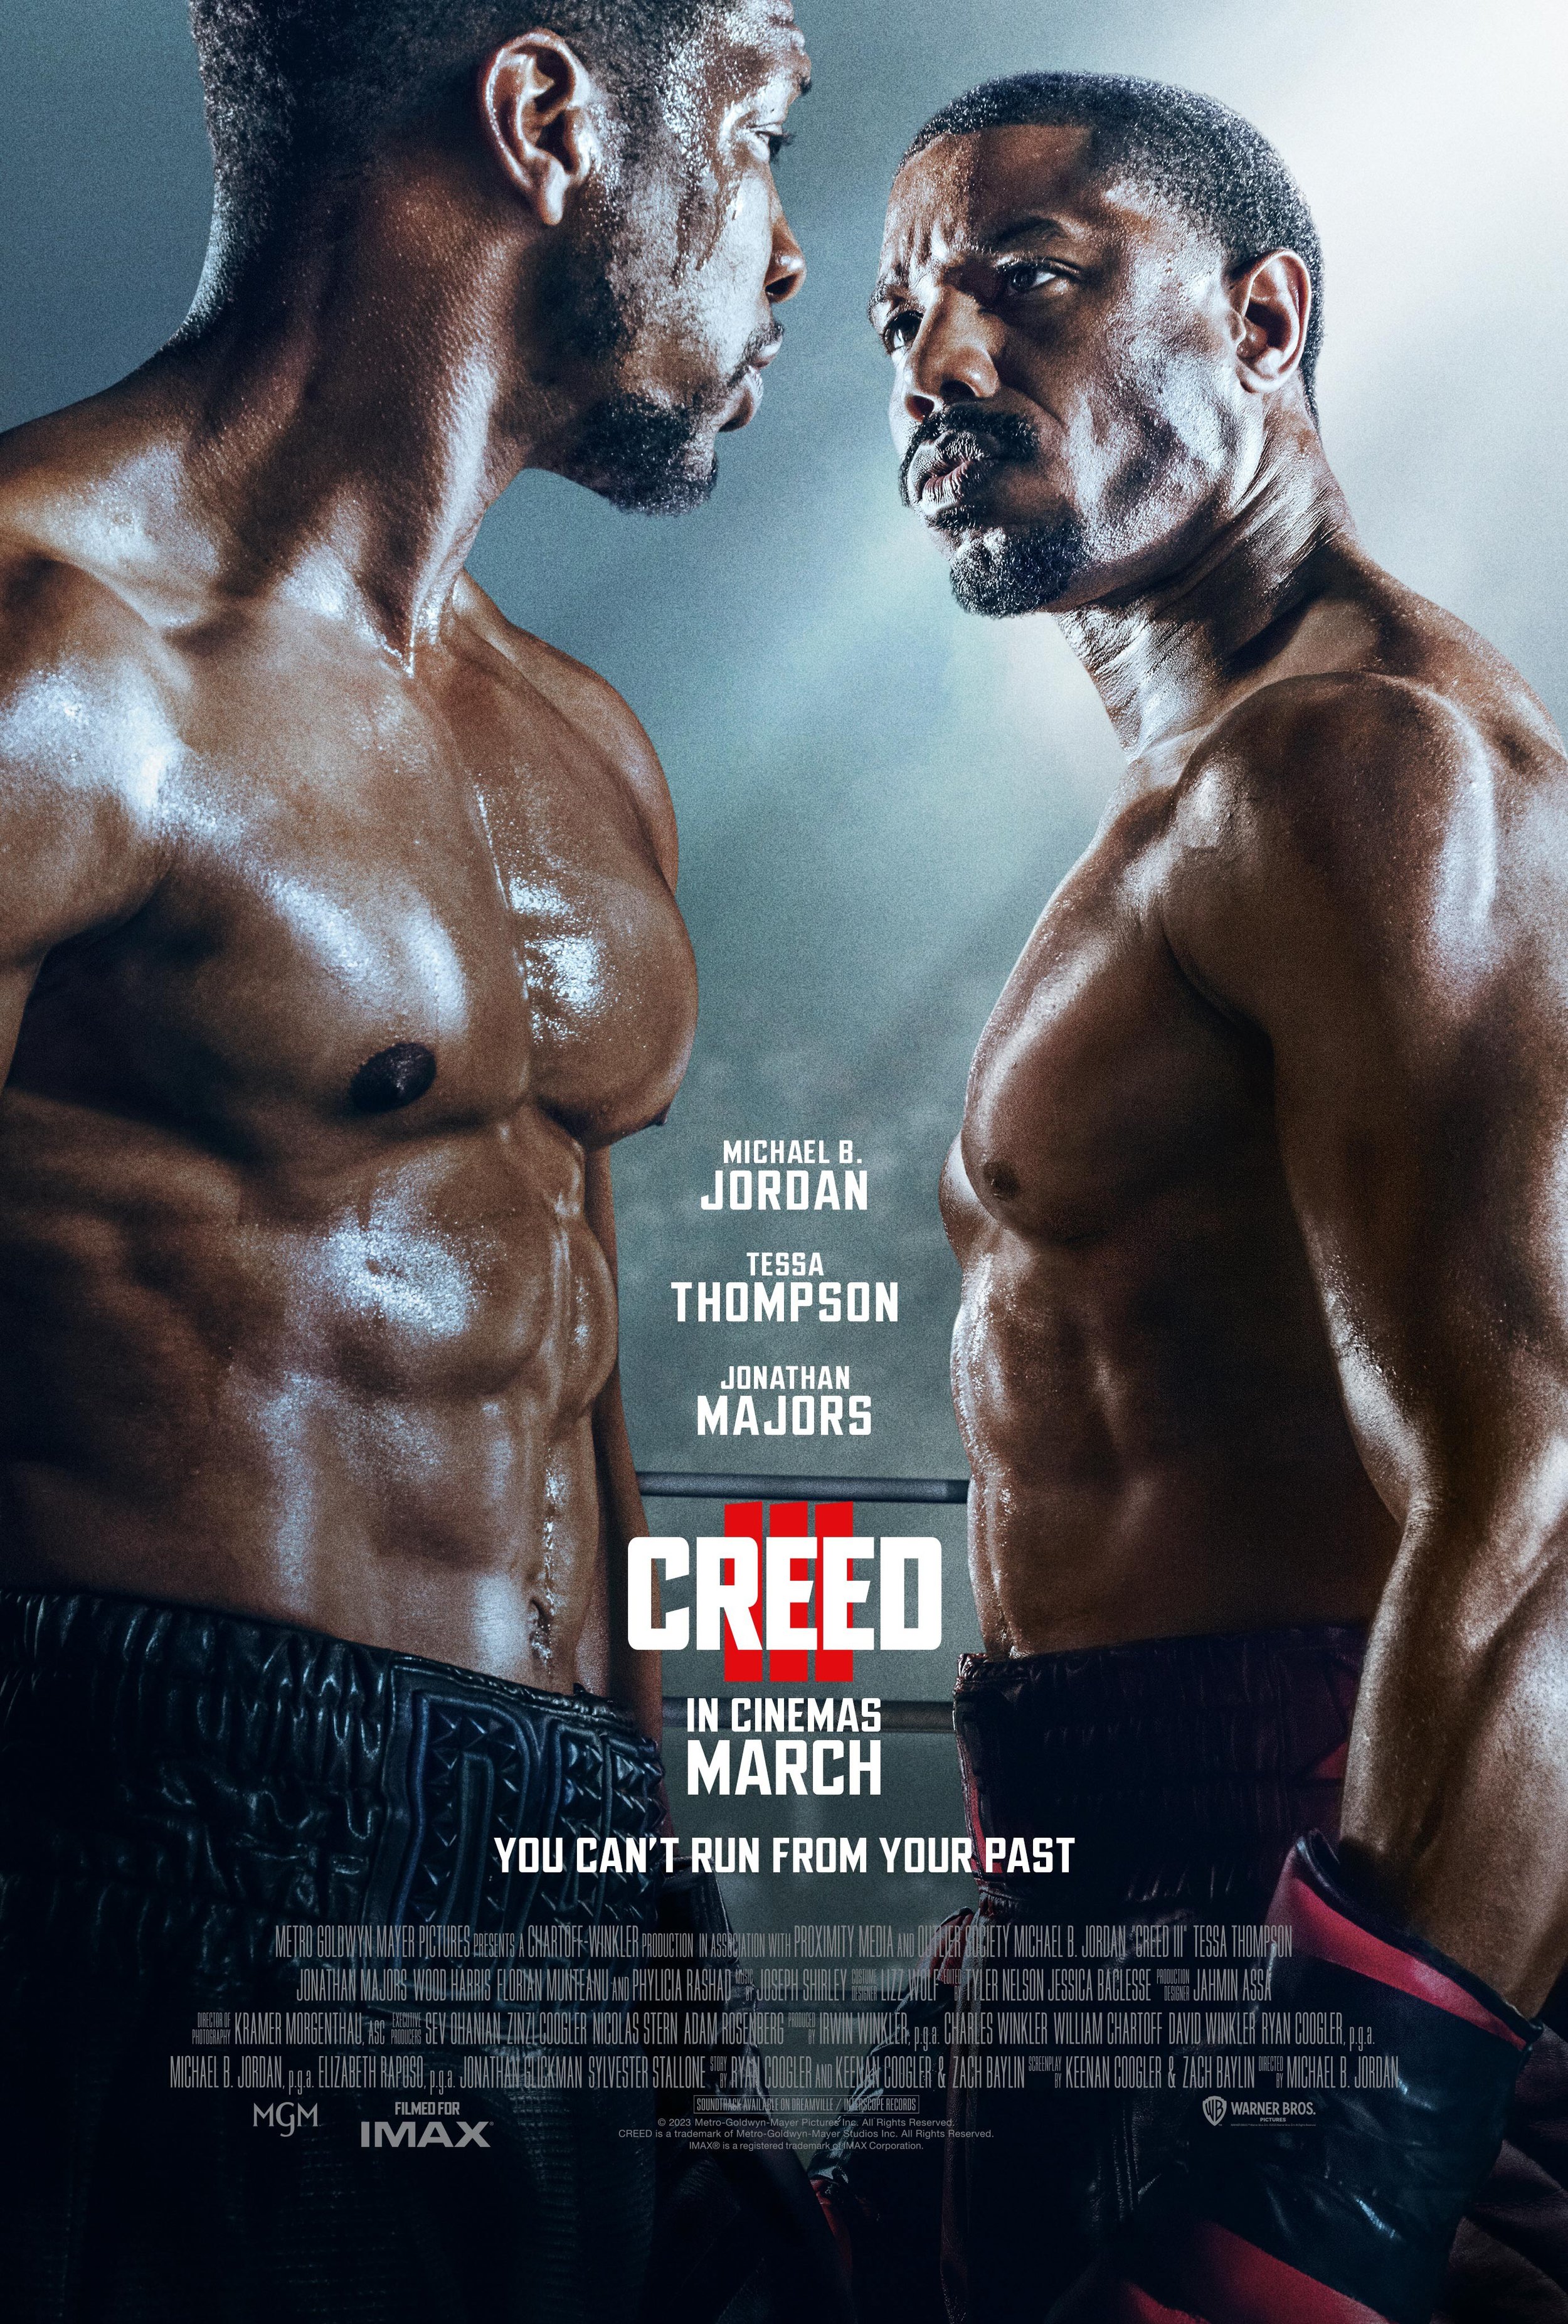 Creed 3' Review: A Cinematic Knock-Out, Arts